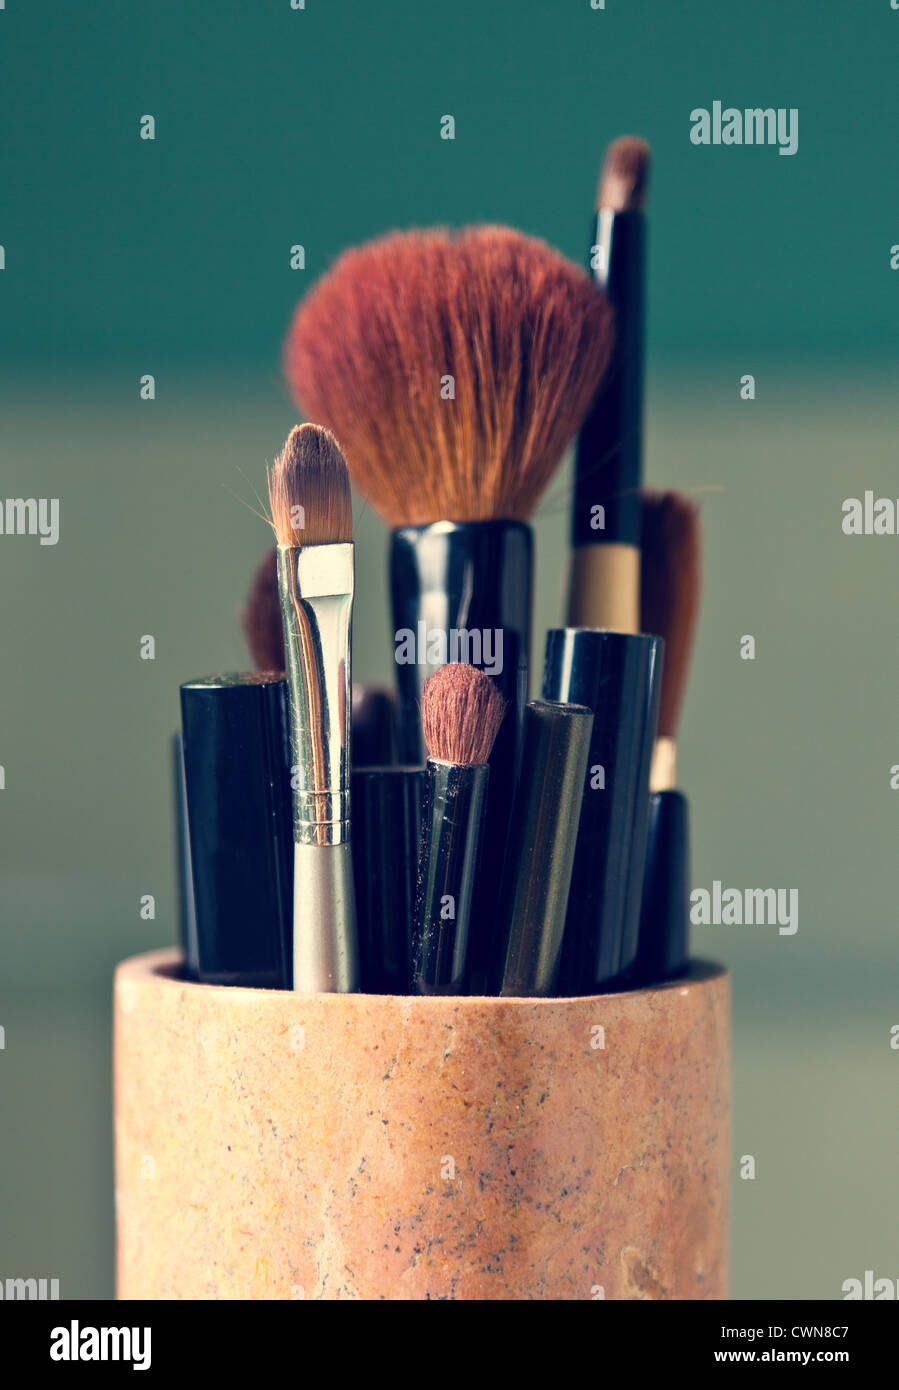 Makeup brushes in a jar Stock Photo